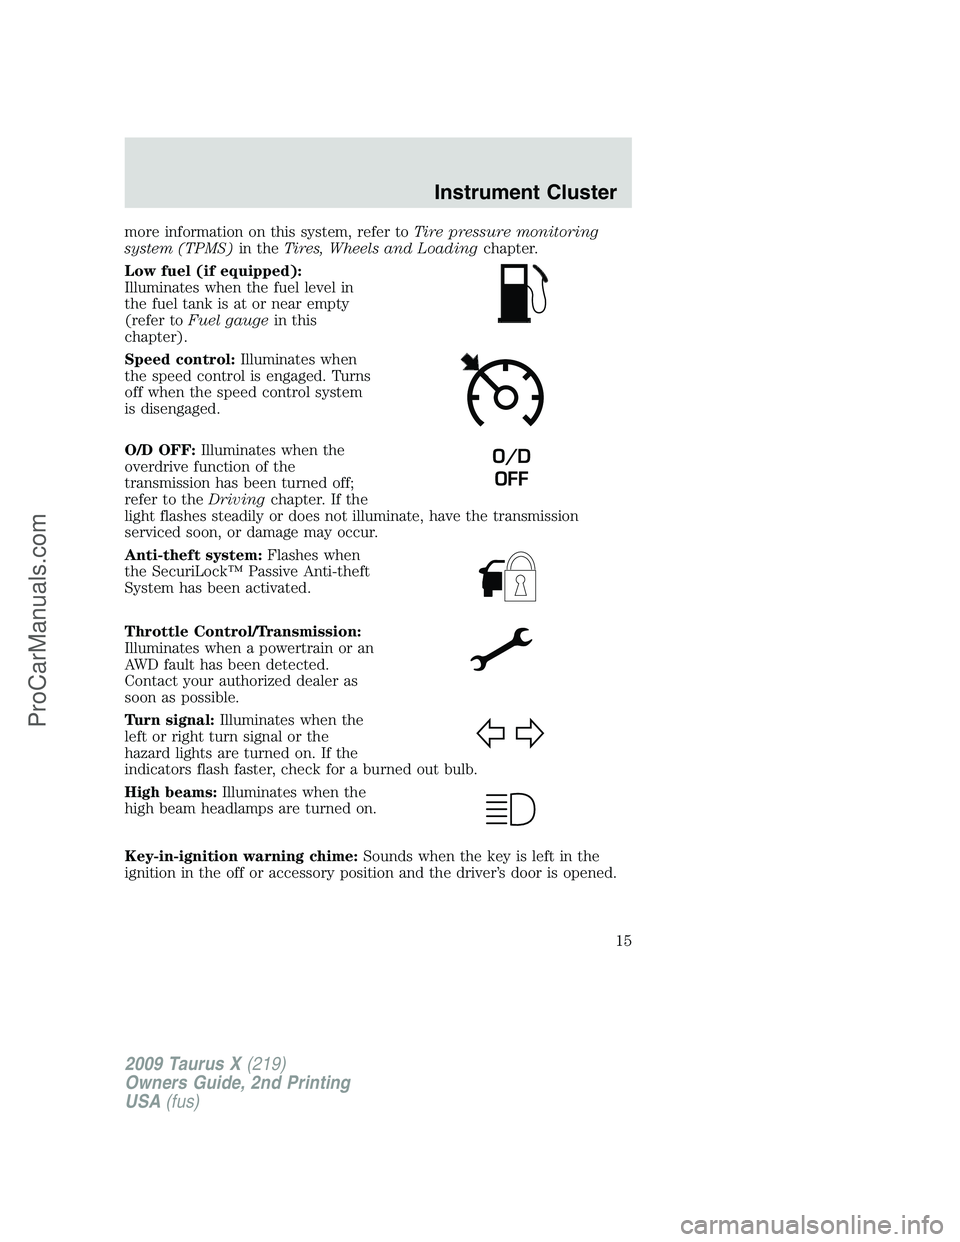 FORD FREESTYLE 2009 User Guide more information on this system, refer toTire pressure monitoring
system (TPMS)in theTires, Wheels and Loadingchapter.
Low fuel (if equipped):
Illuminates when the fuel level in
the fuel tank is at or